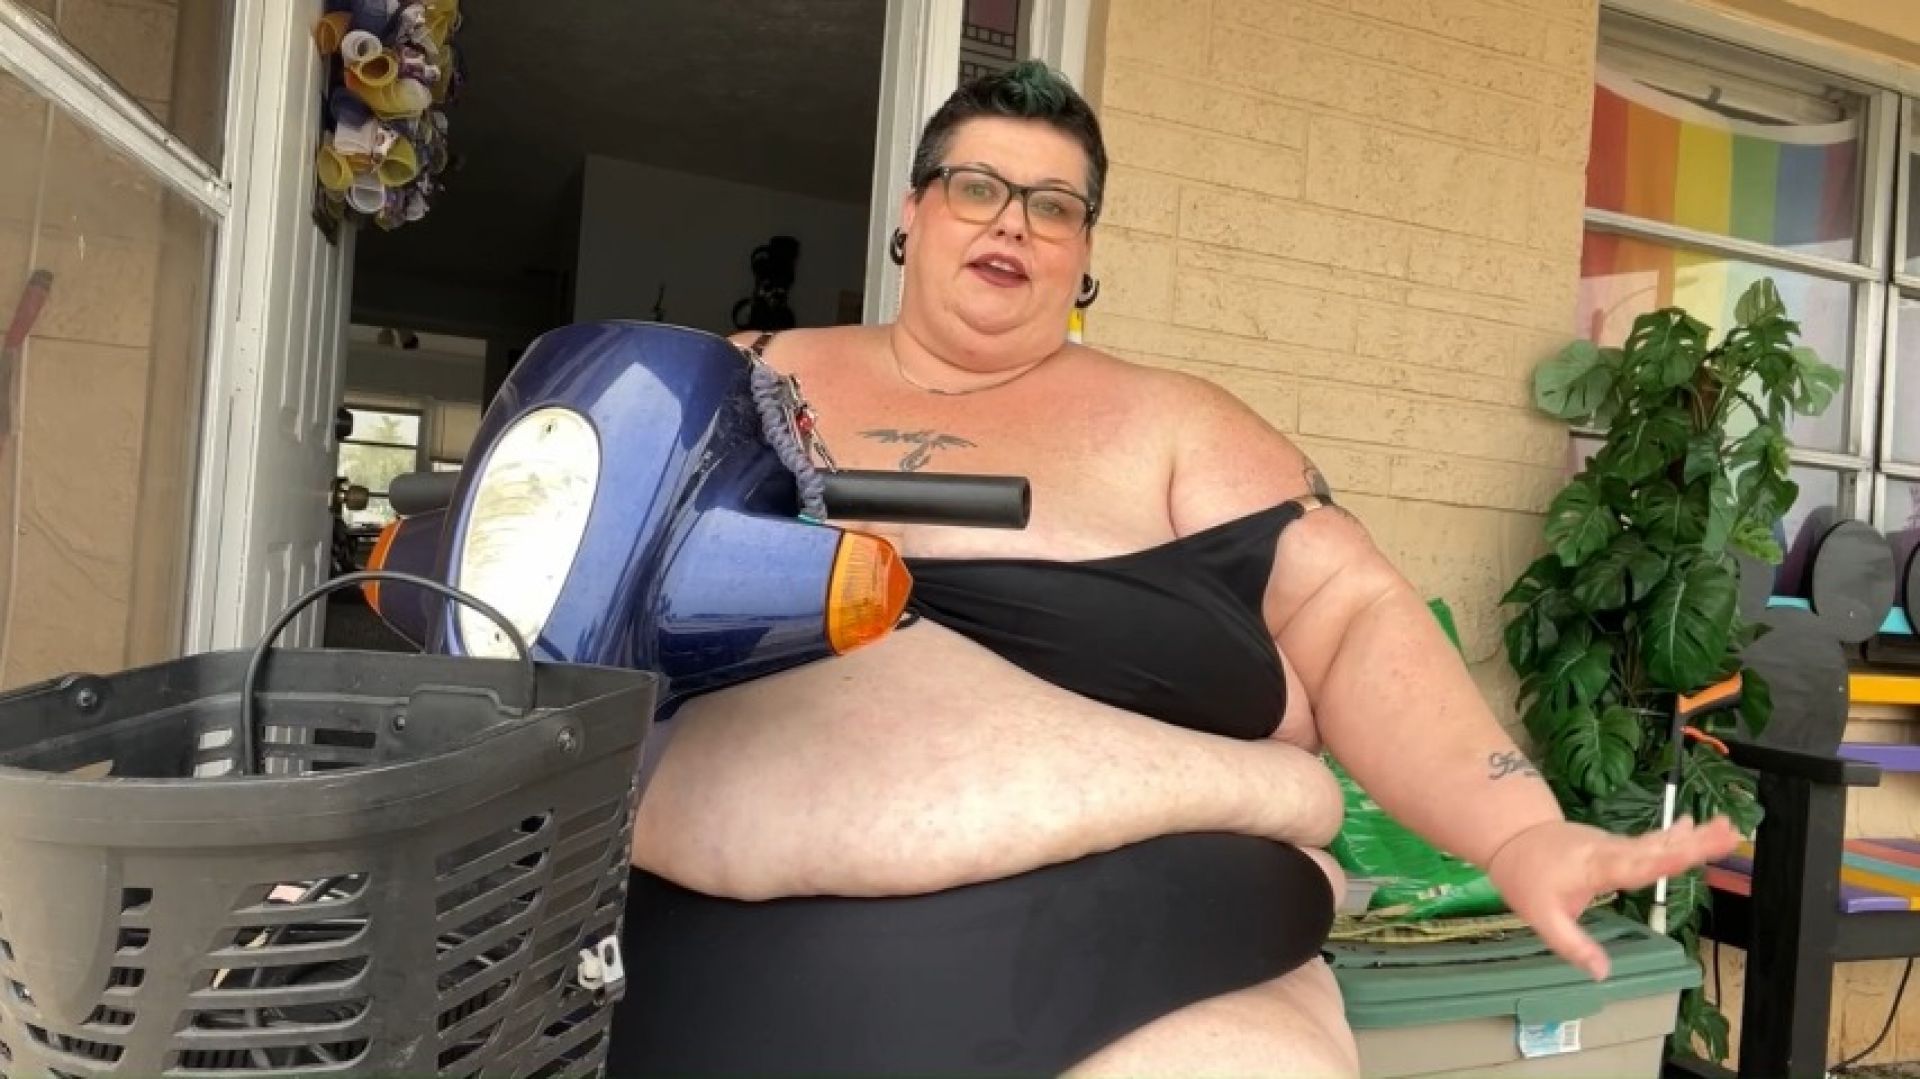 USSBBW does Housework on a Scooter HD